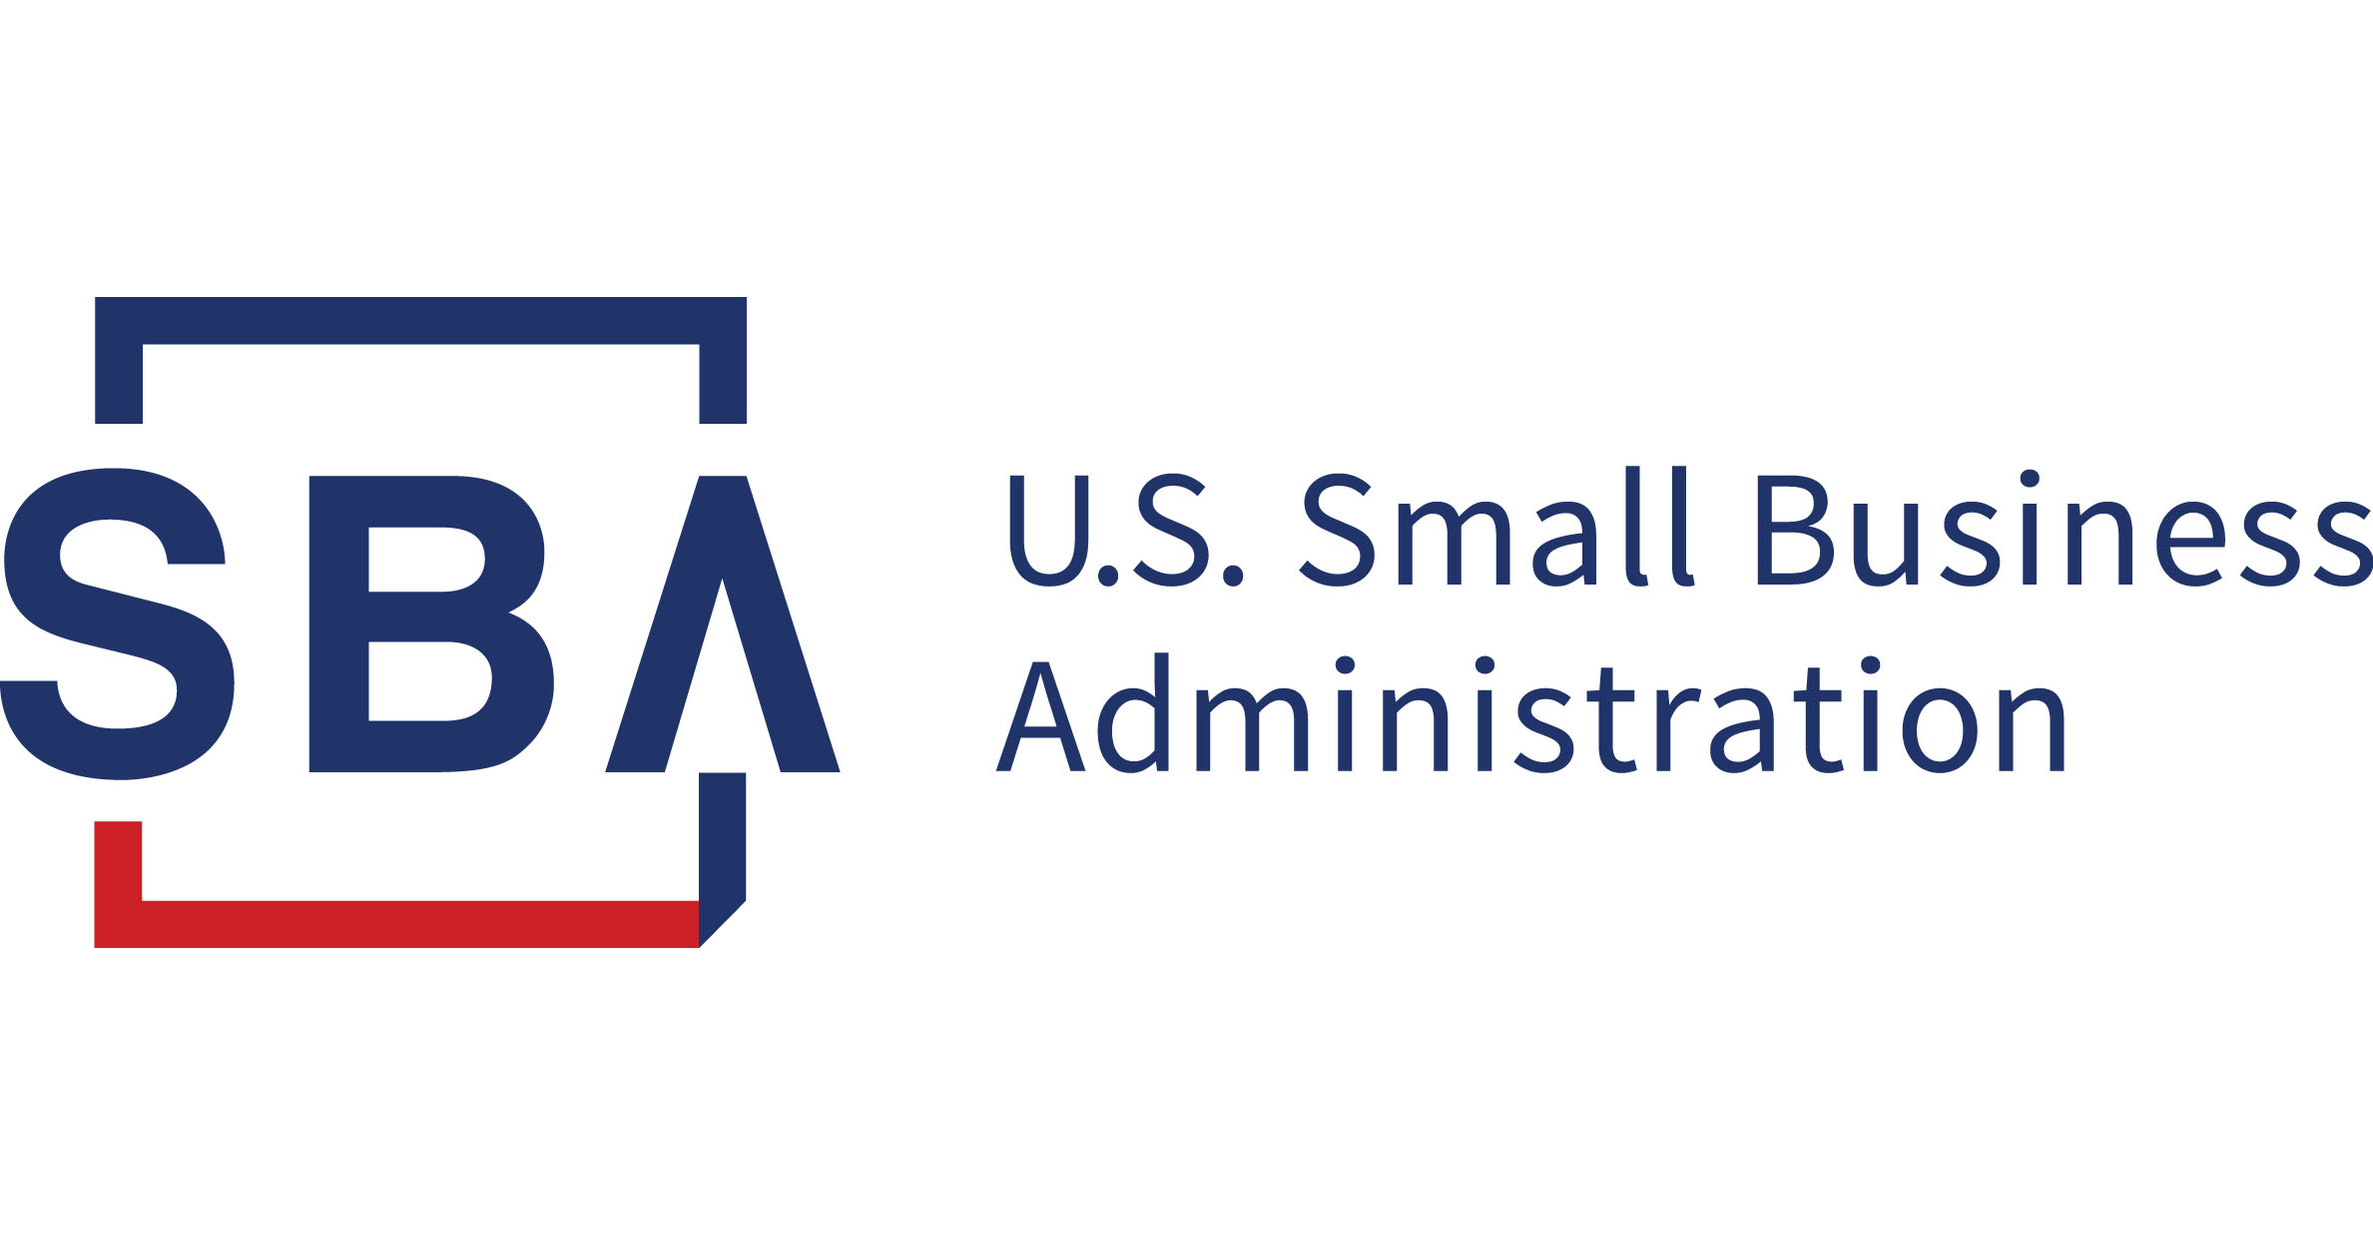 U.S. Small Business Administration seal